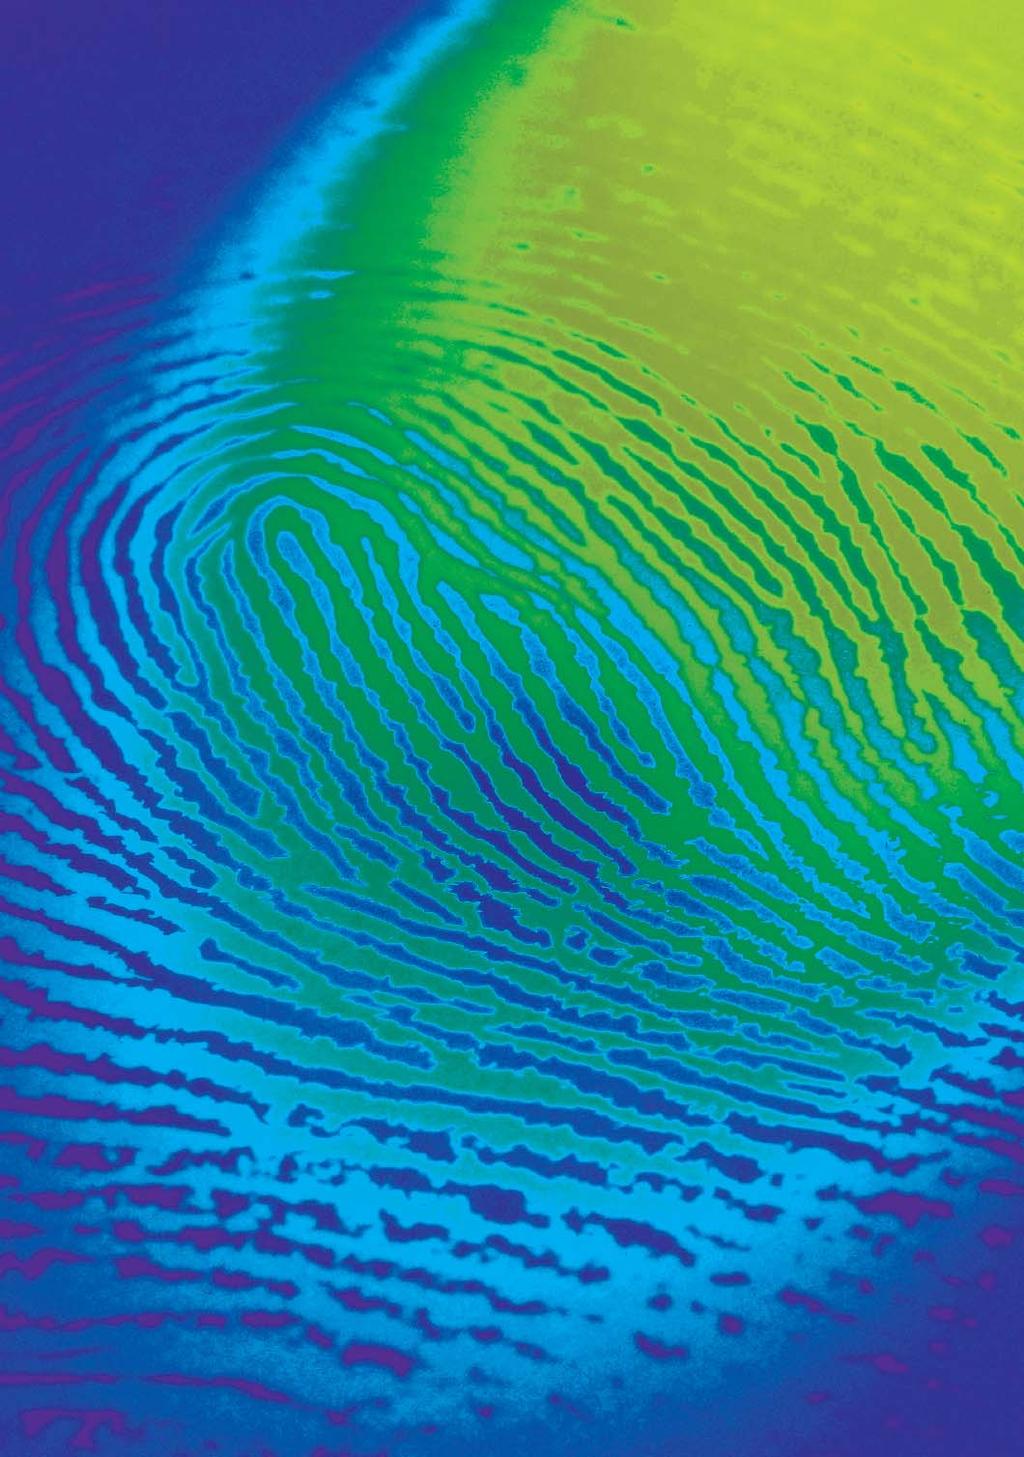 16 THE USE OF BIOINFORMATION IN COURT DNA and fingerprints can only assist in a prosecution when the science is robust, and is interpreted and represented accurately.